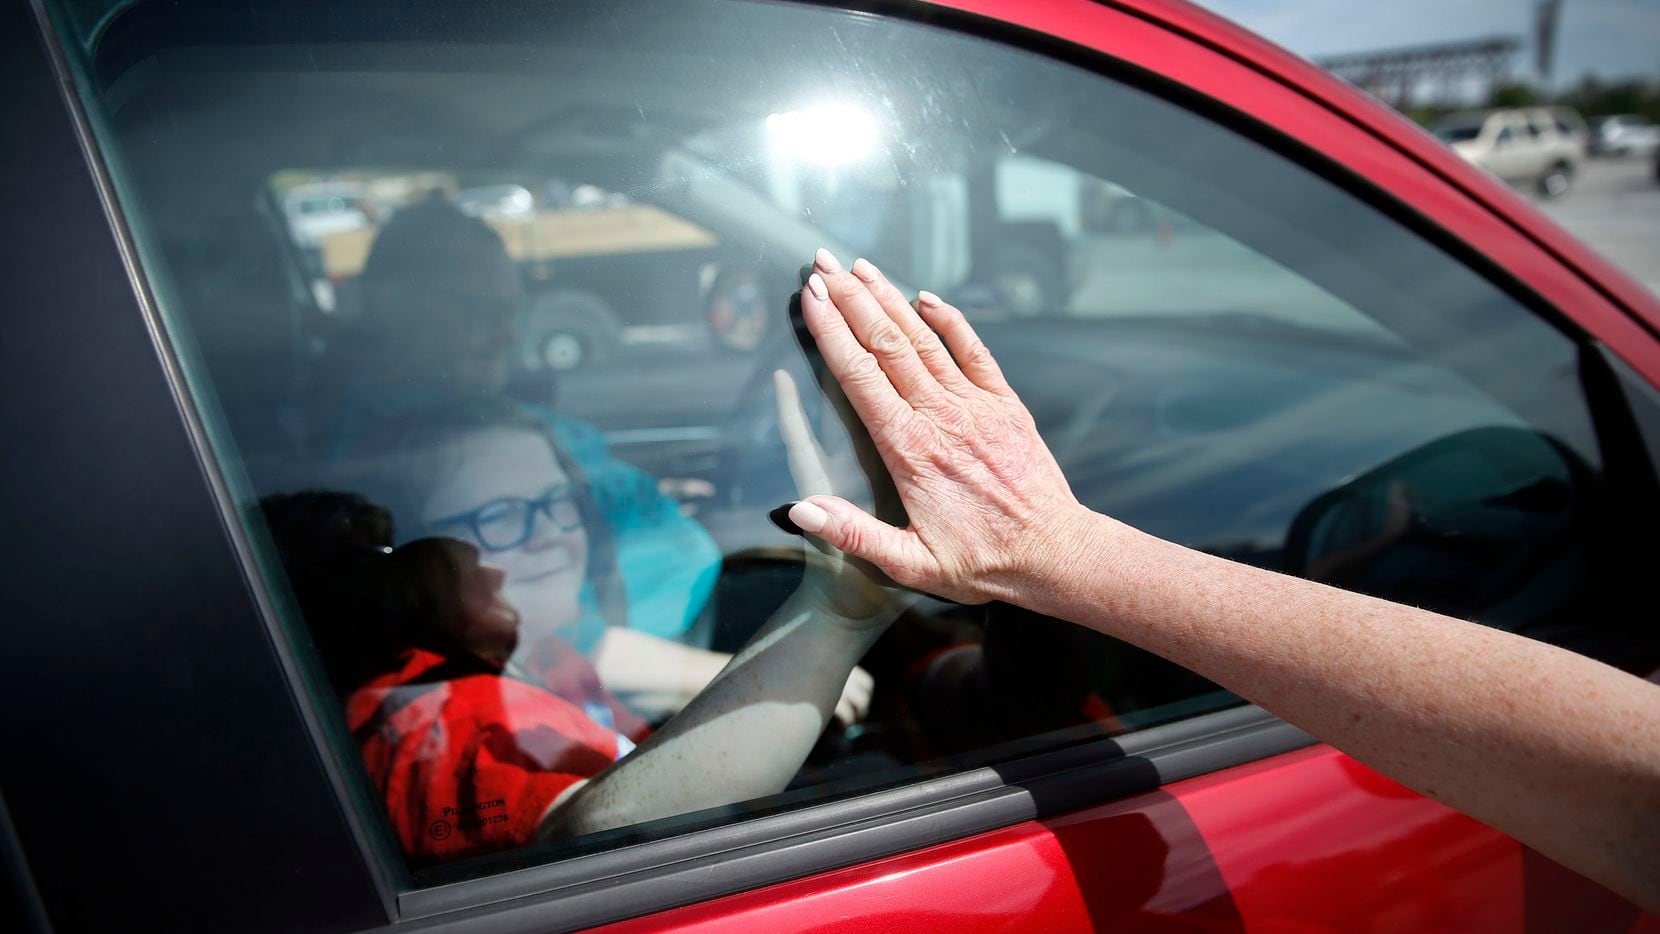 Volunteer Karen Kirk, of Houston, gives a student a high-five through the window after a drive-through meal pickup outside AT&T Stadium in Arlington, Texas, March 28, 2020. Arlington Charities, Fielder Road Baptist Church and Tarrant Area Food Bank volunteers loaded school parents' vehicles with weekend meals for Arlington ISD families.